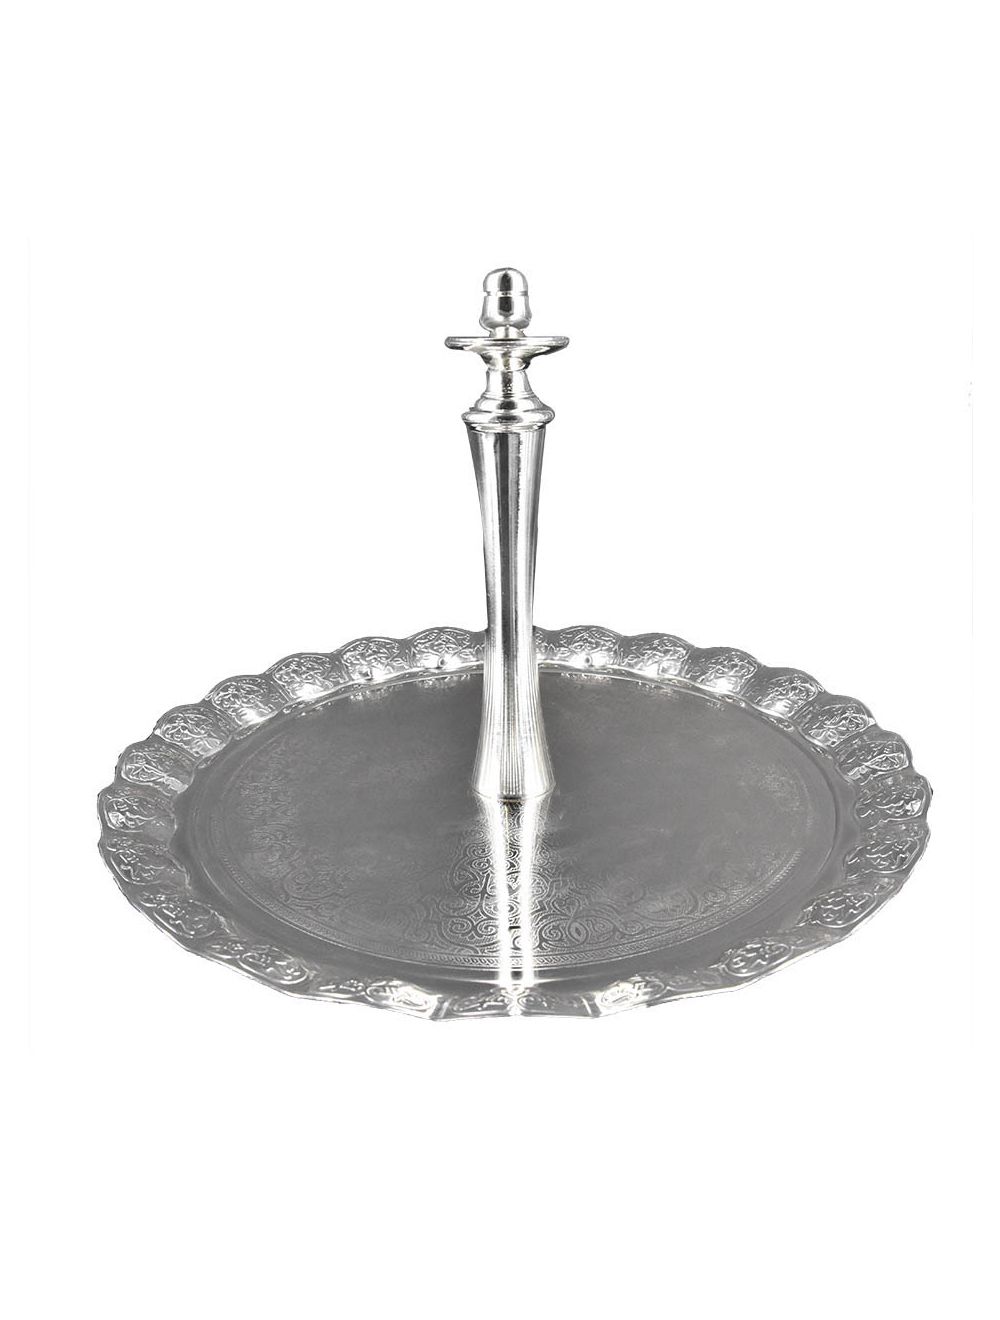 Serving Tray With Holder Acrylic Silver Design